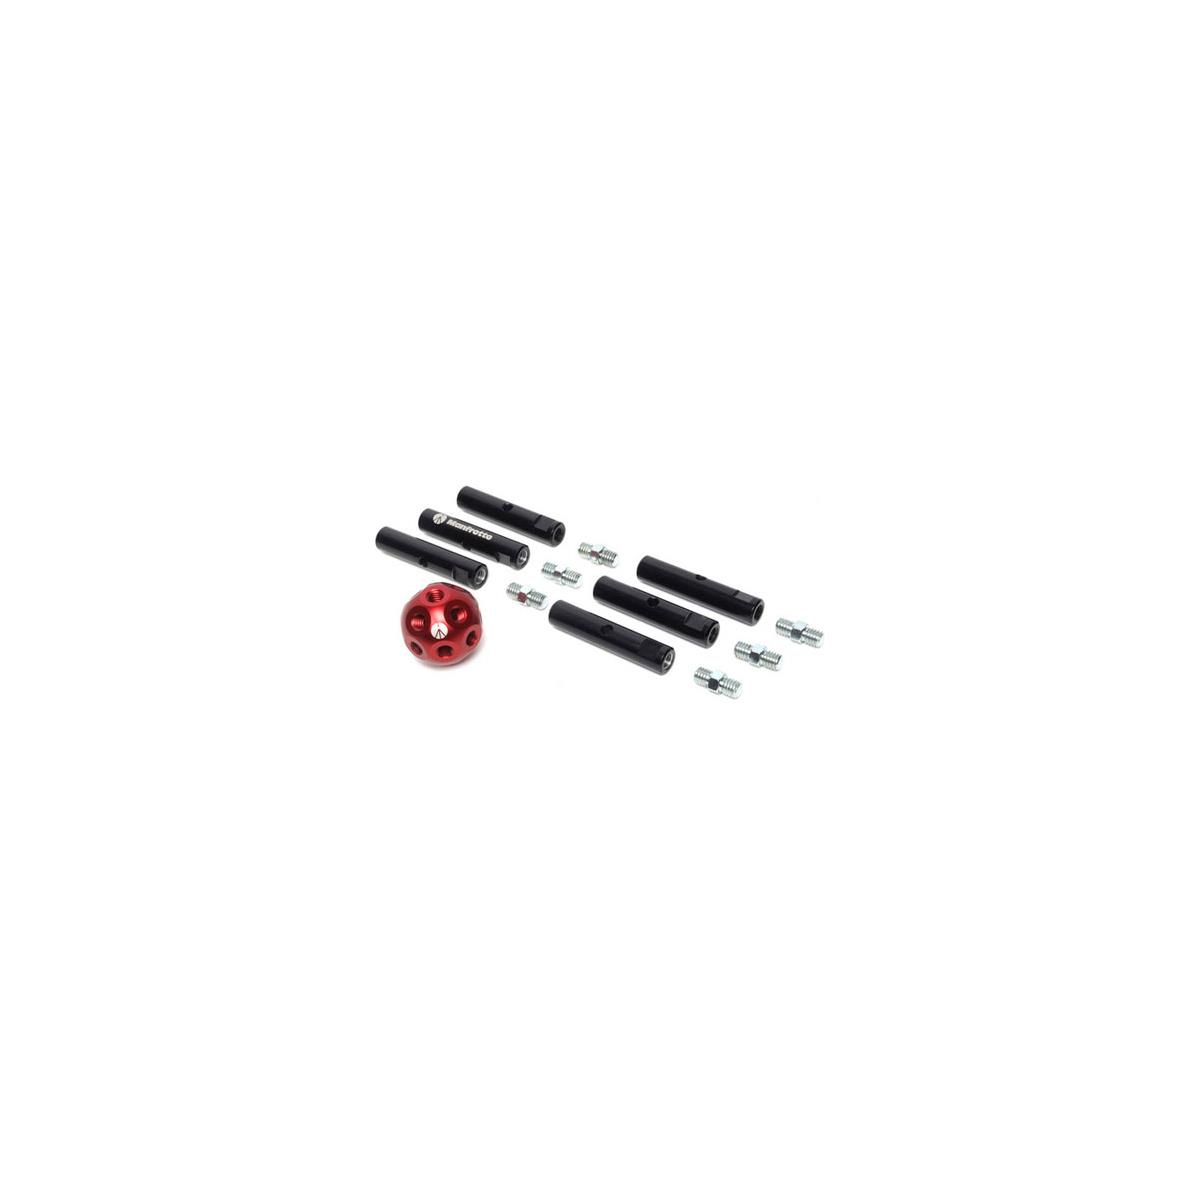 Manfrotto Dado Kit 6 Rods